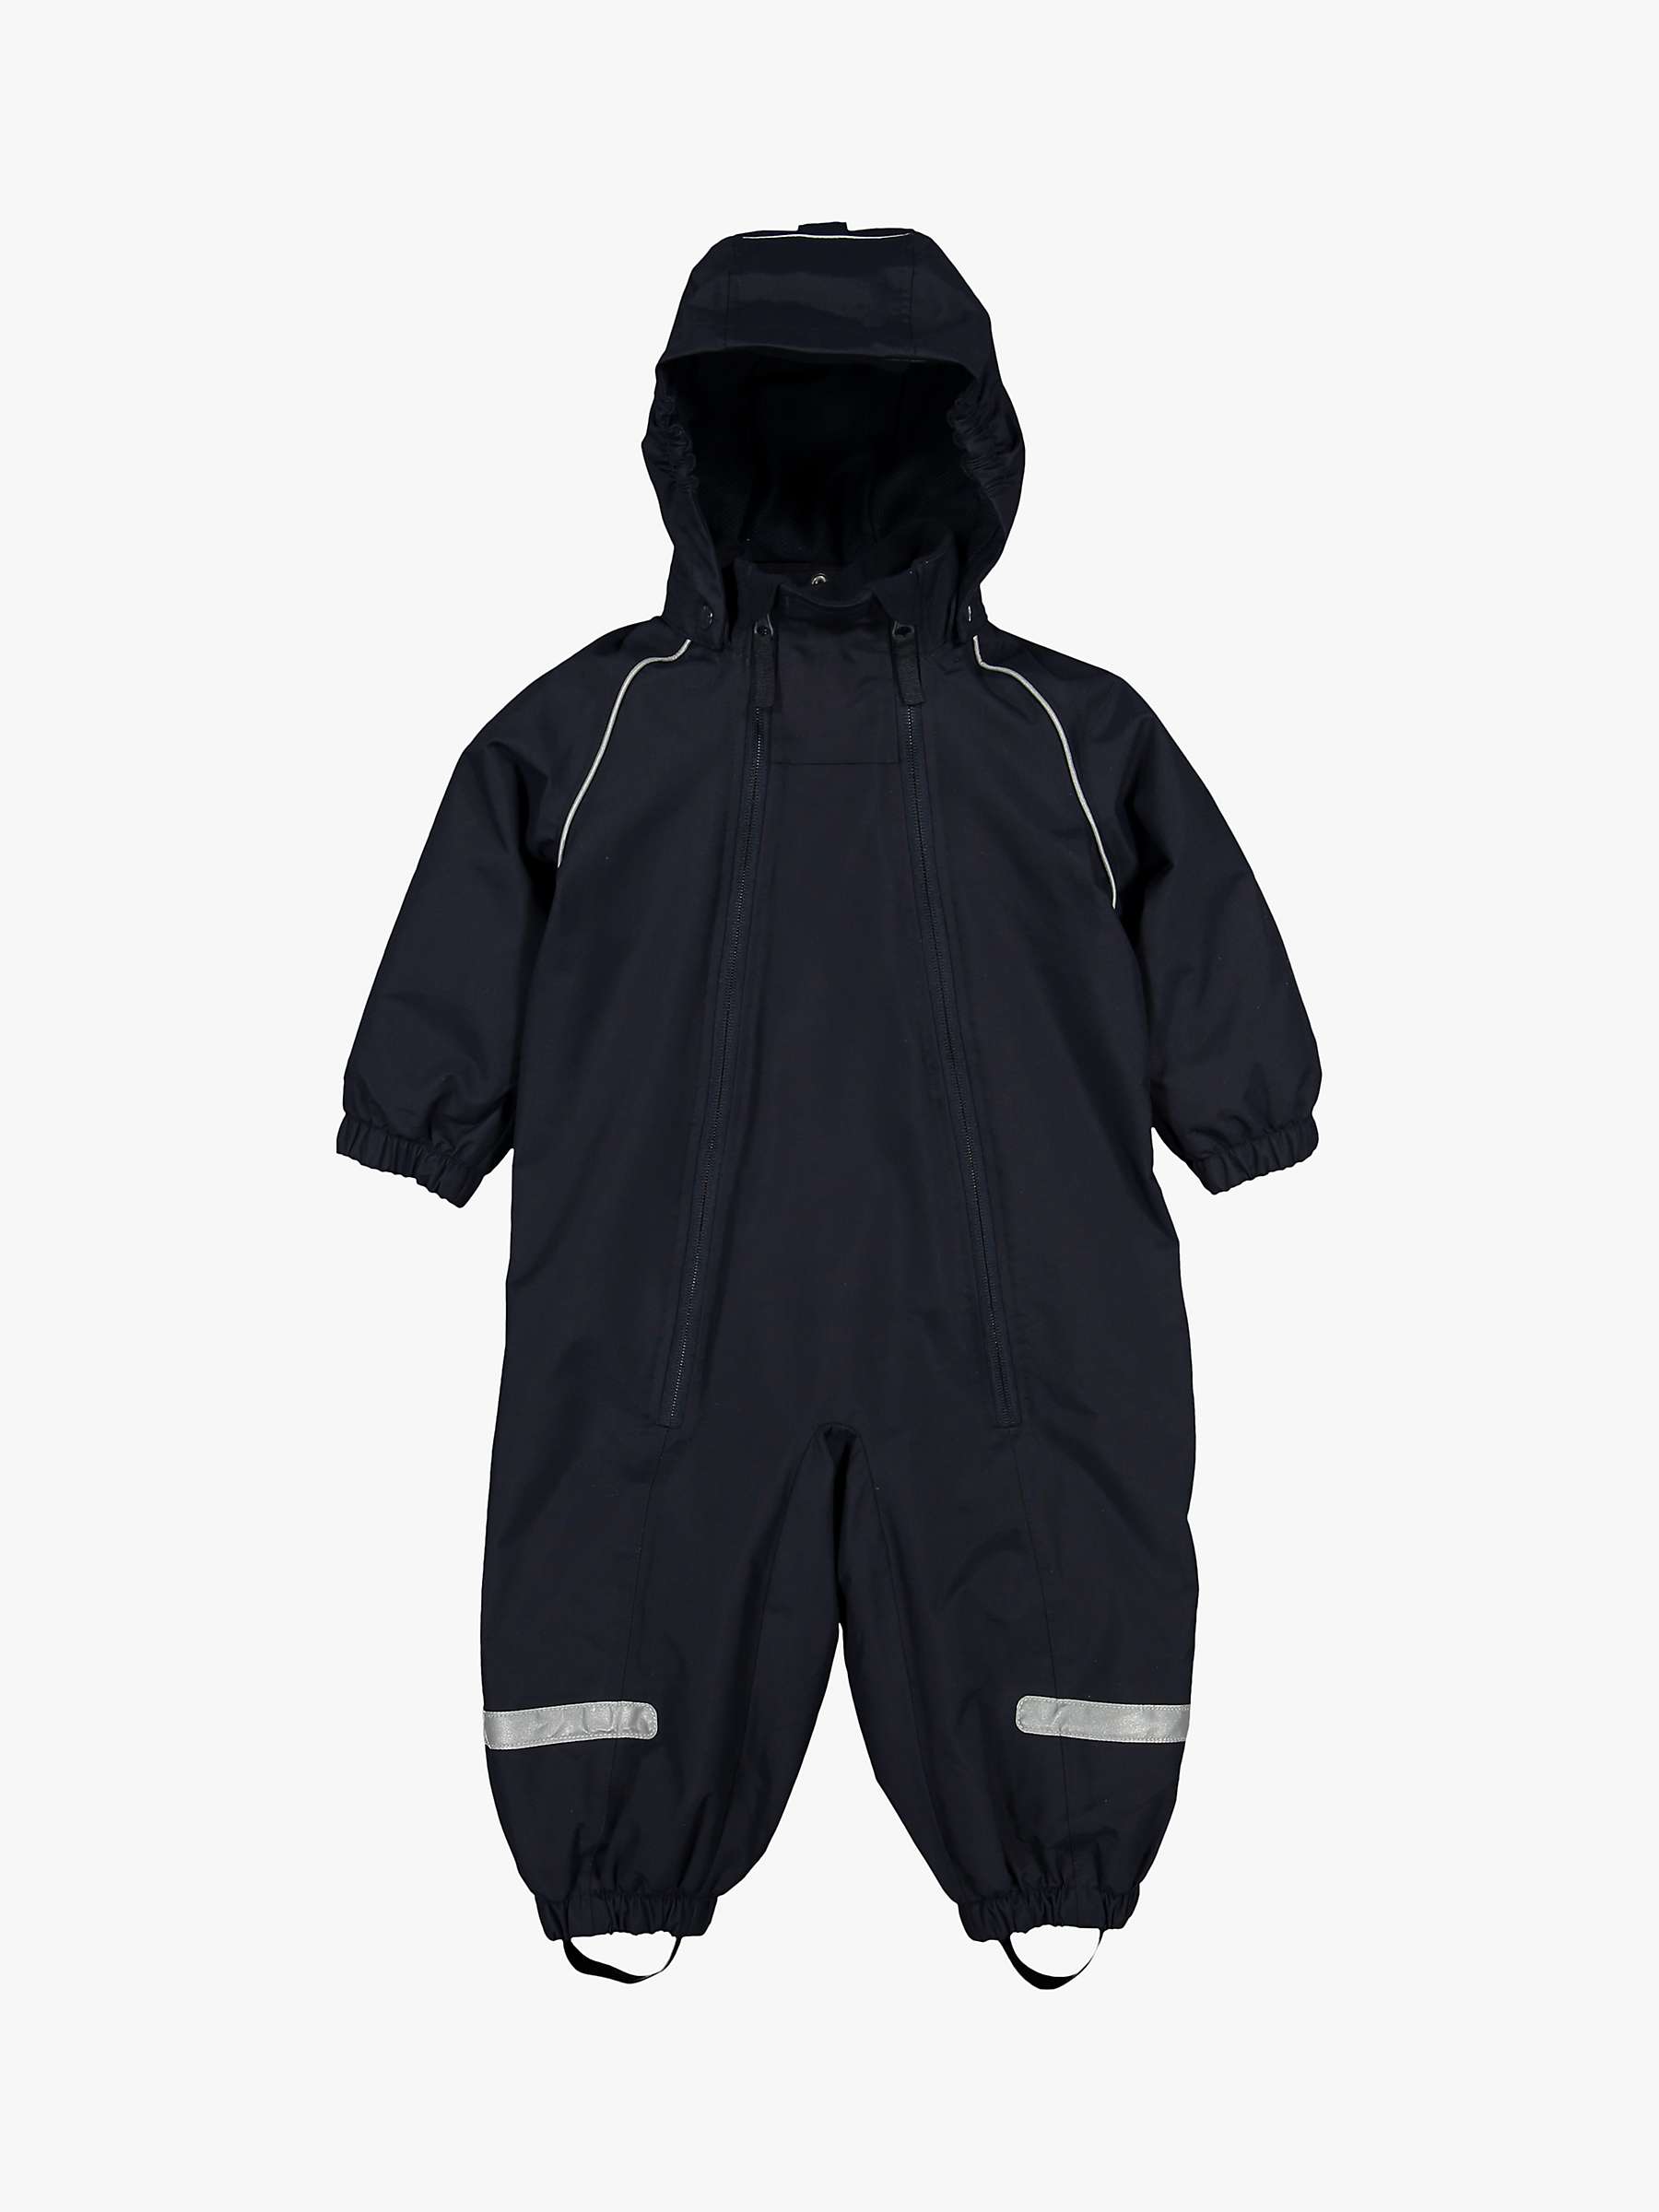 Buy Polarn O. Pyret Baby Waterproof Shell Overall, Dark Sapphire Online at johnlewis.com